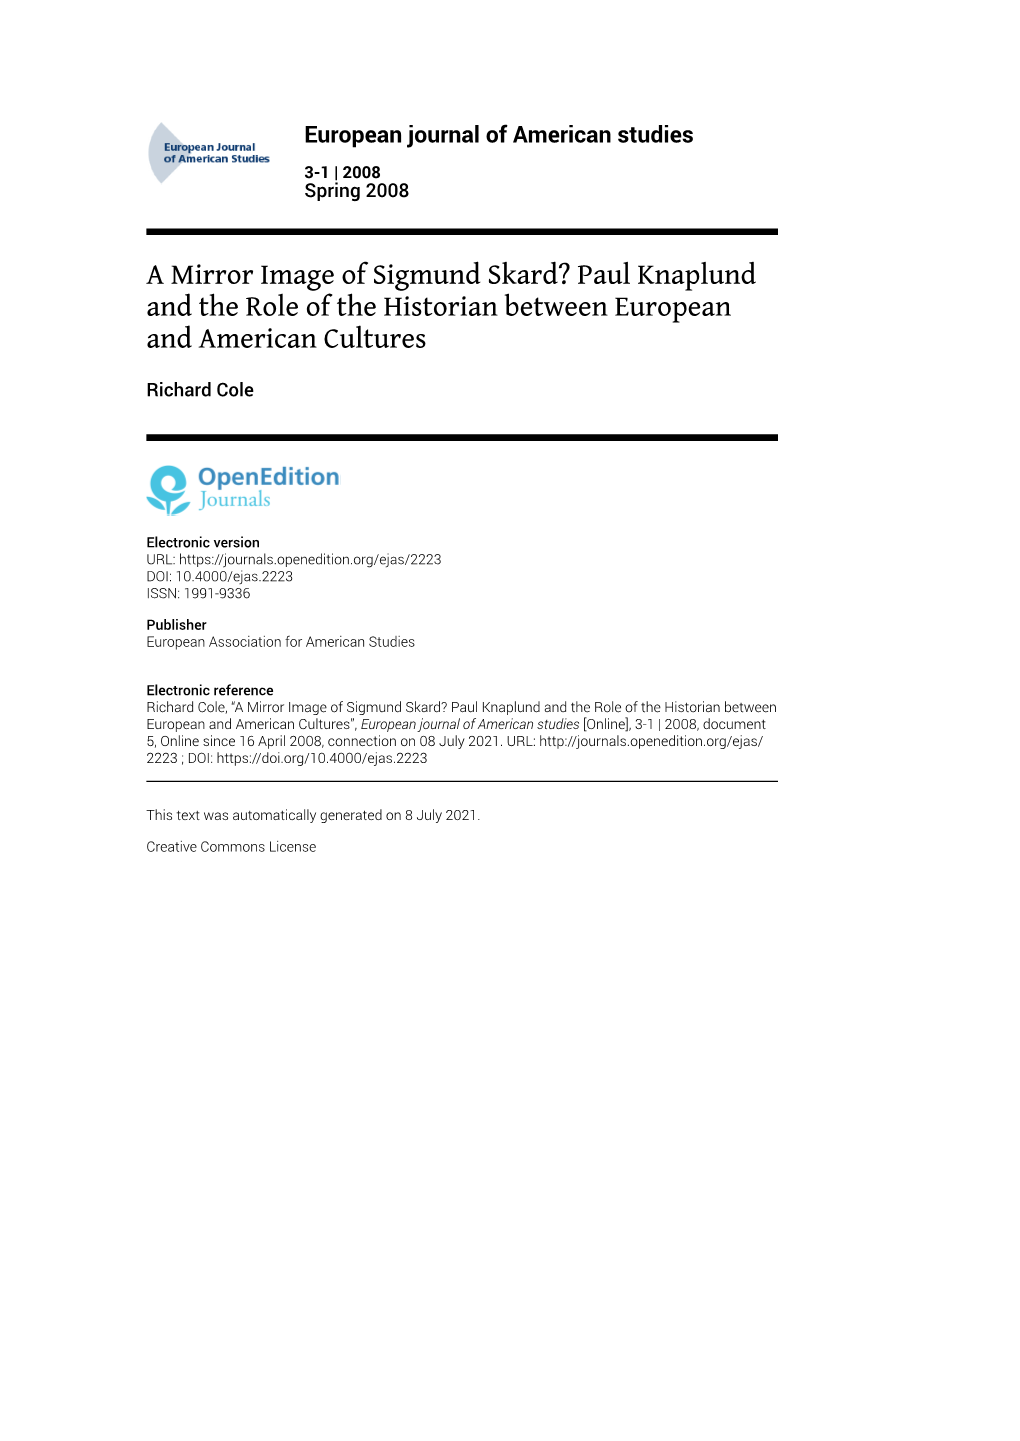 European Journal of American Studies, 3-1 | 2008 a Mirror Image of Sigmund Skard? Paul Knaplund and the Role of the Historian